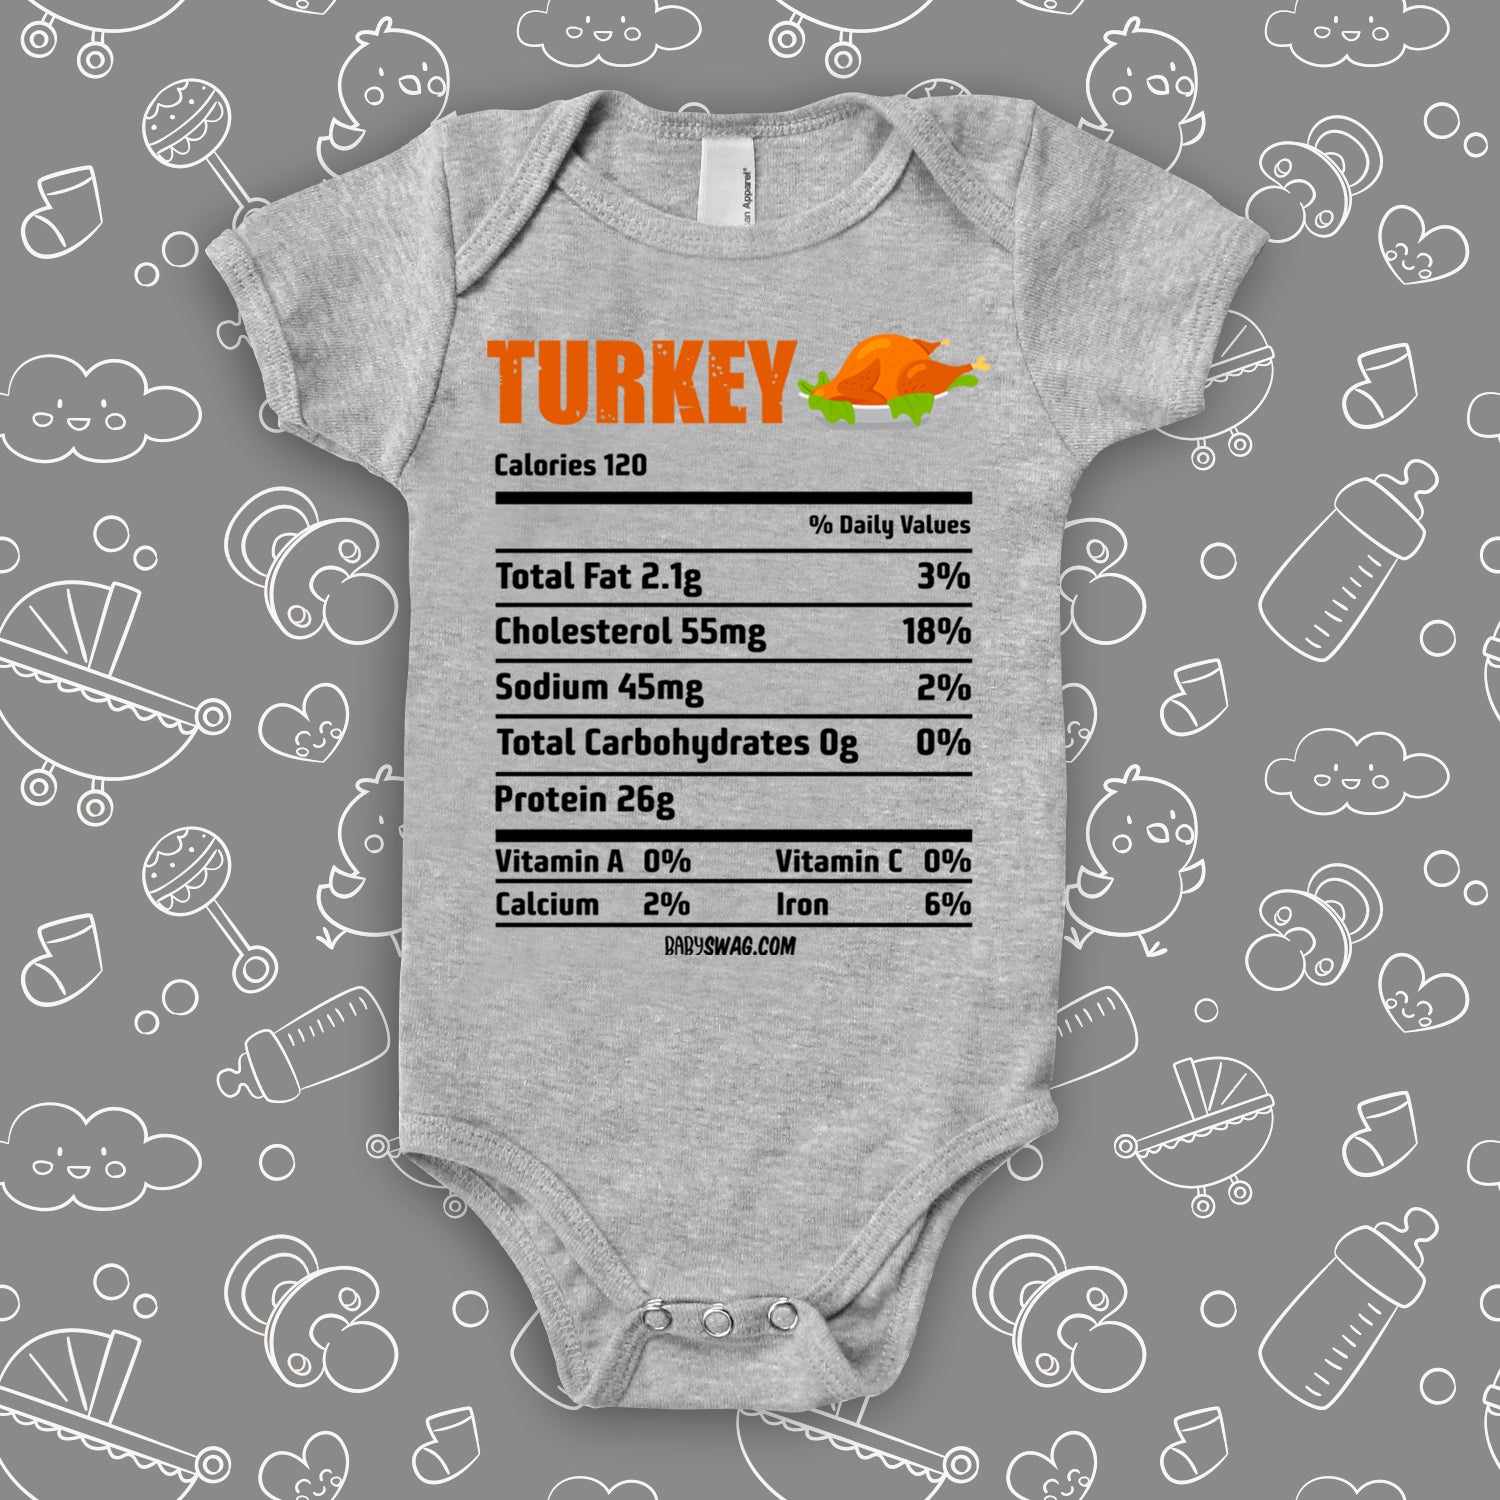 The "Turkey Nutrition Facts" cute baby onesies in grey. 